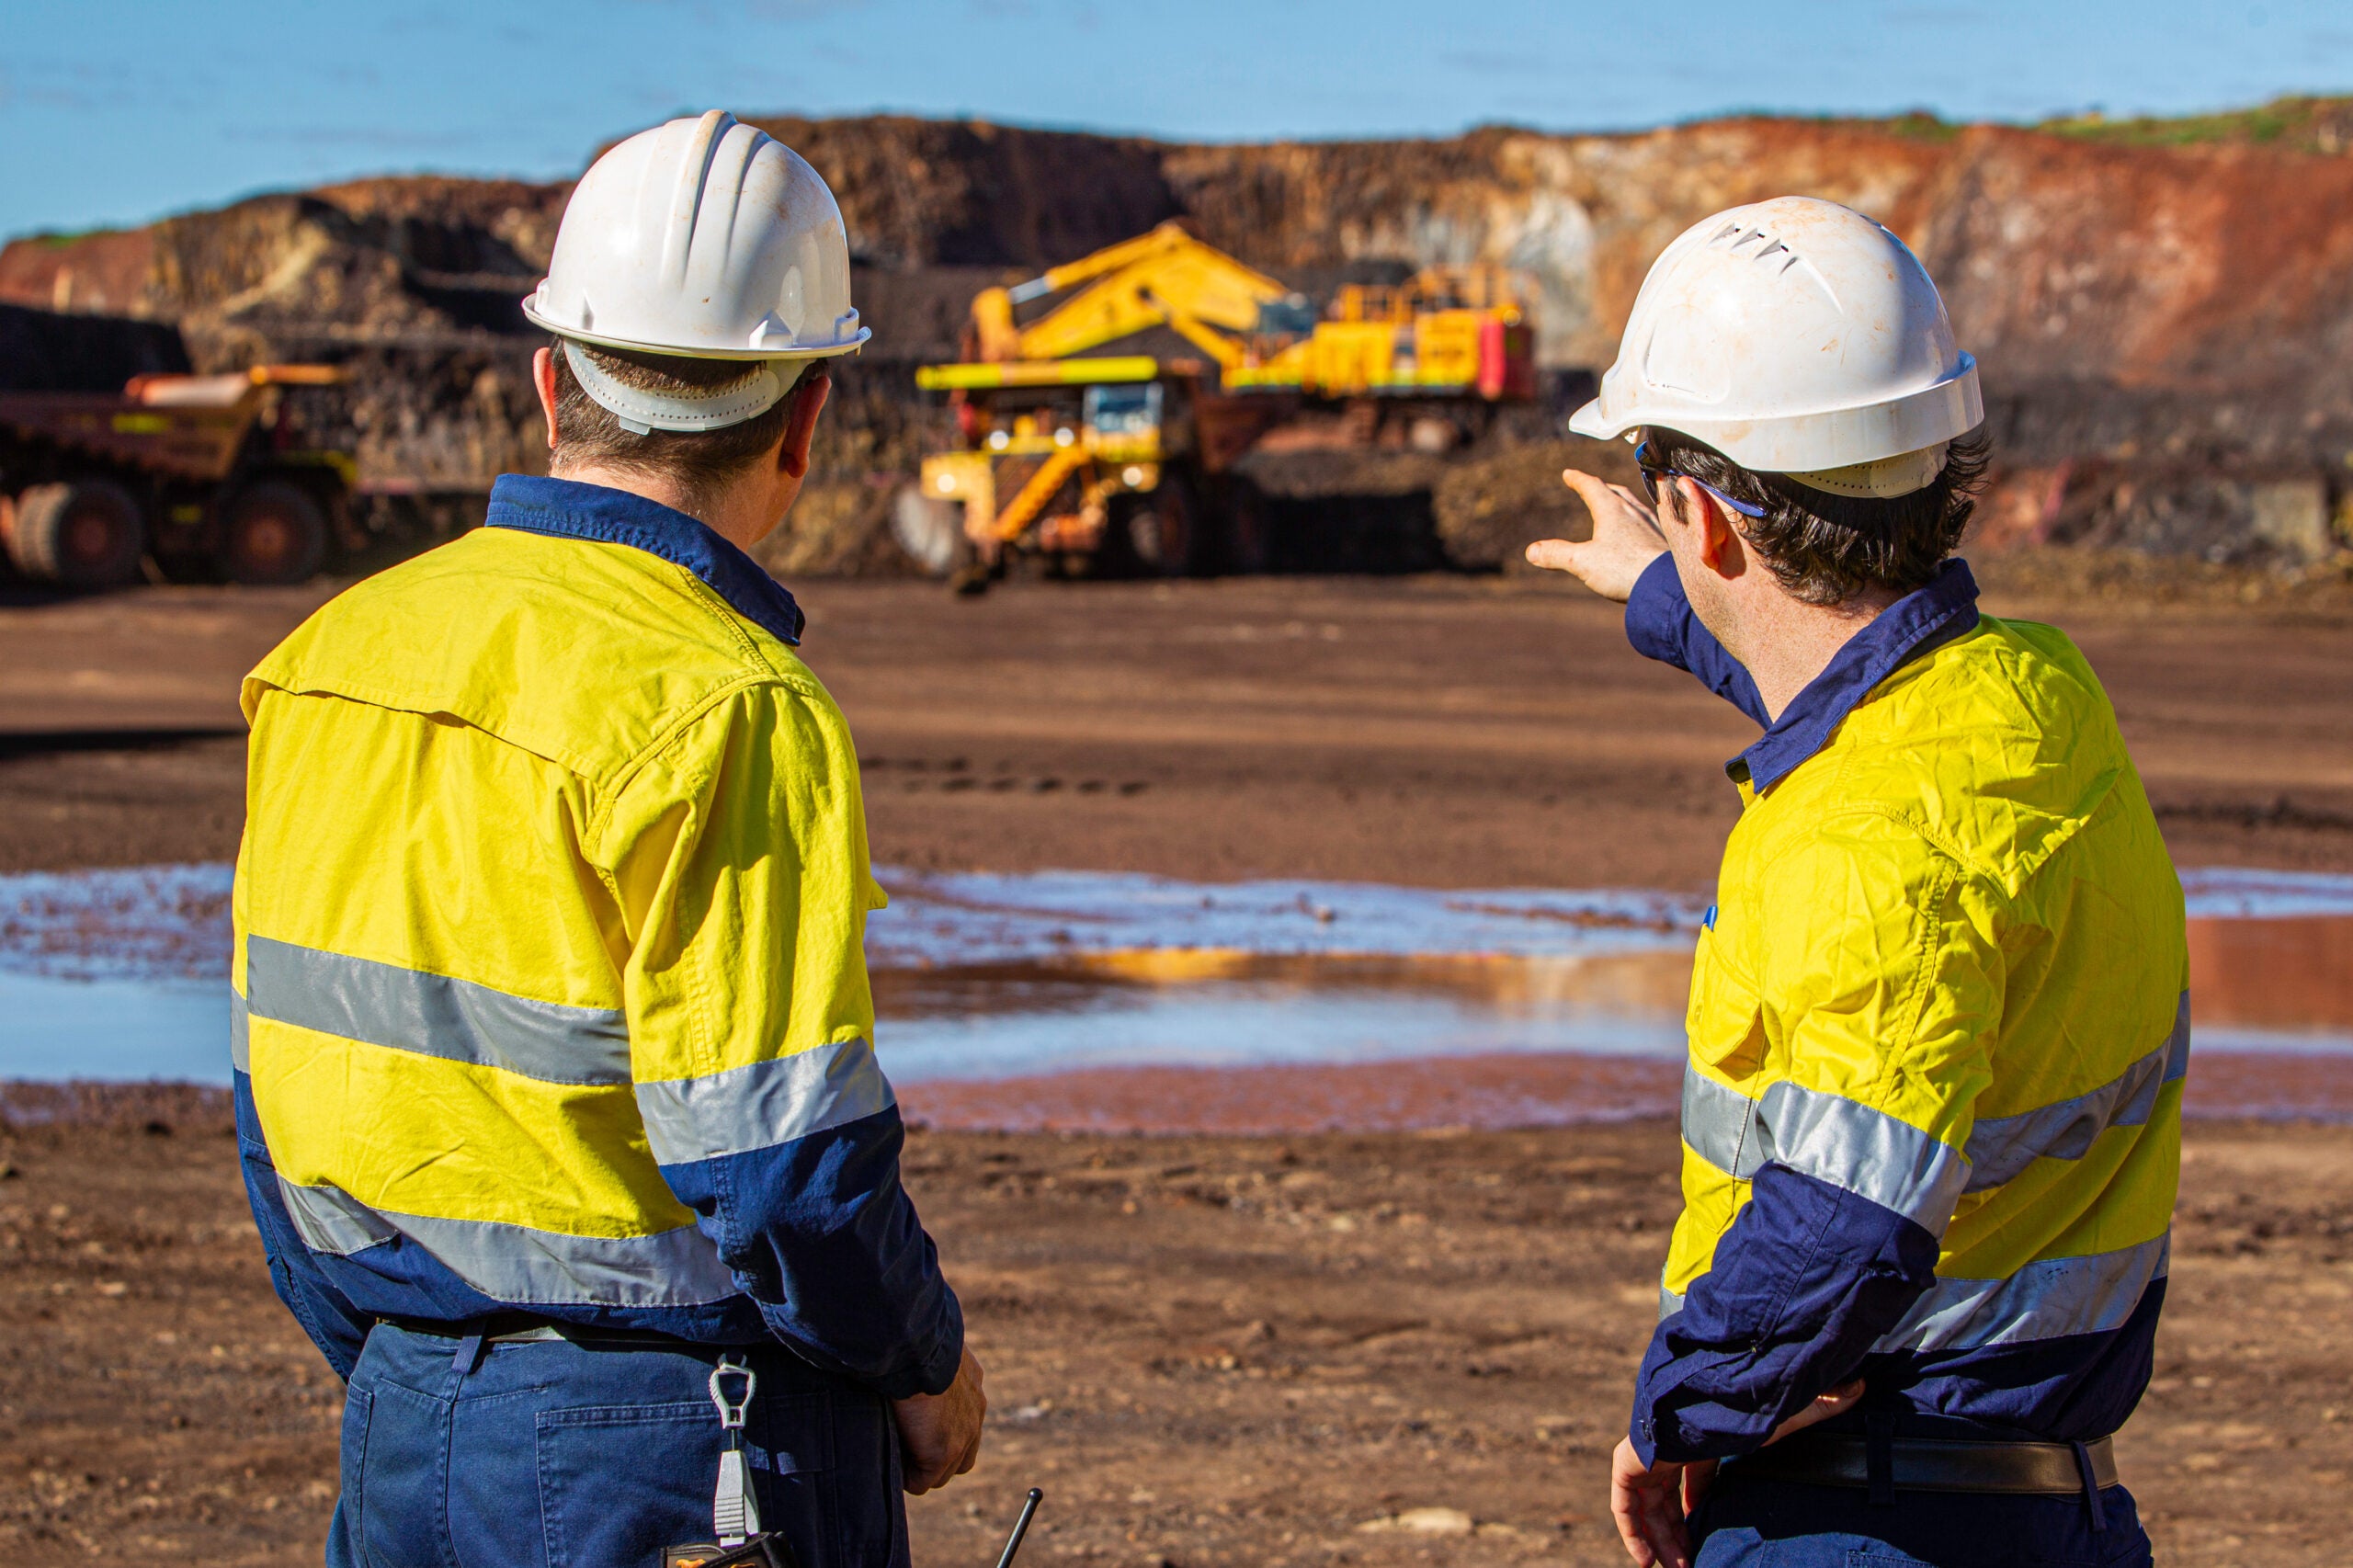 Case study: how to save time, cost, and mining interaction for service and dewatering bores